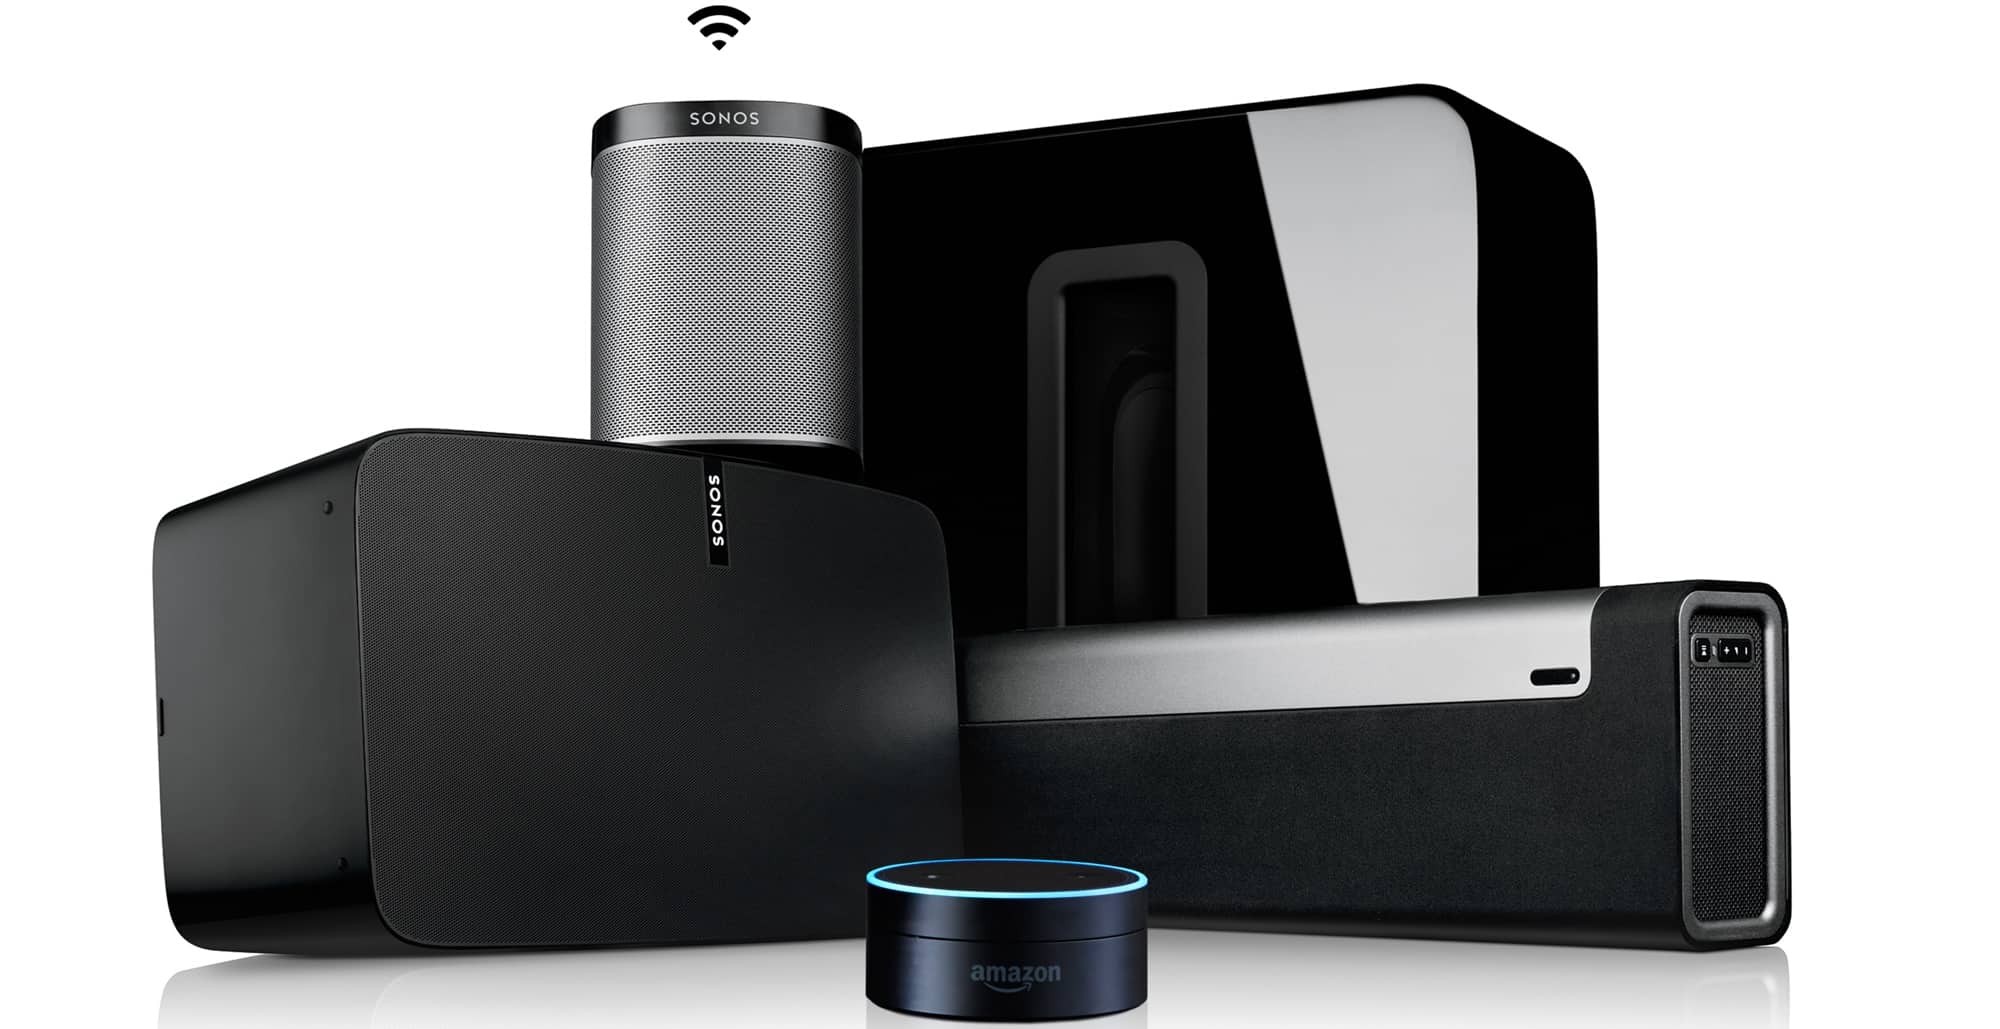 For Geeks Only: Hey Alexa, Tell Sonos to Play Stevie Wonder in the Kitchen